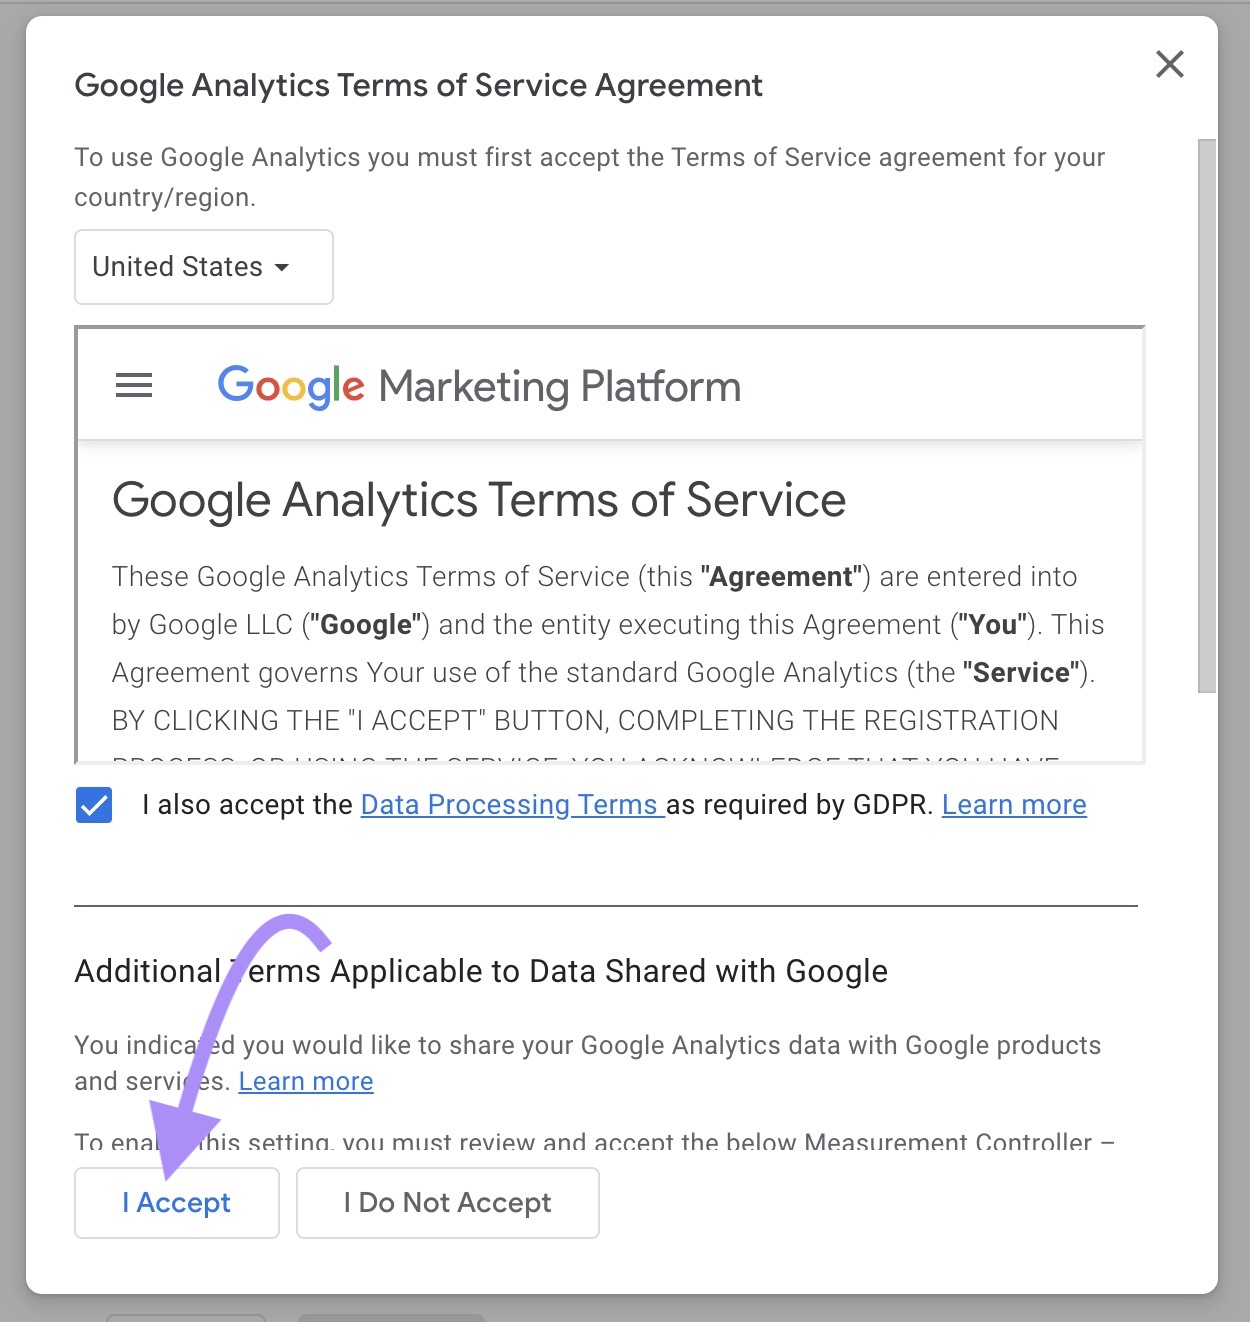 Accept Google Analytics terms of service agreement